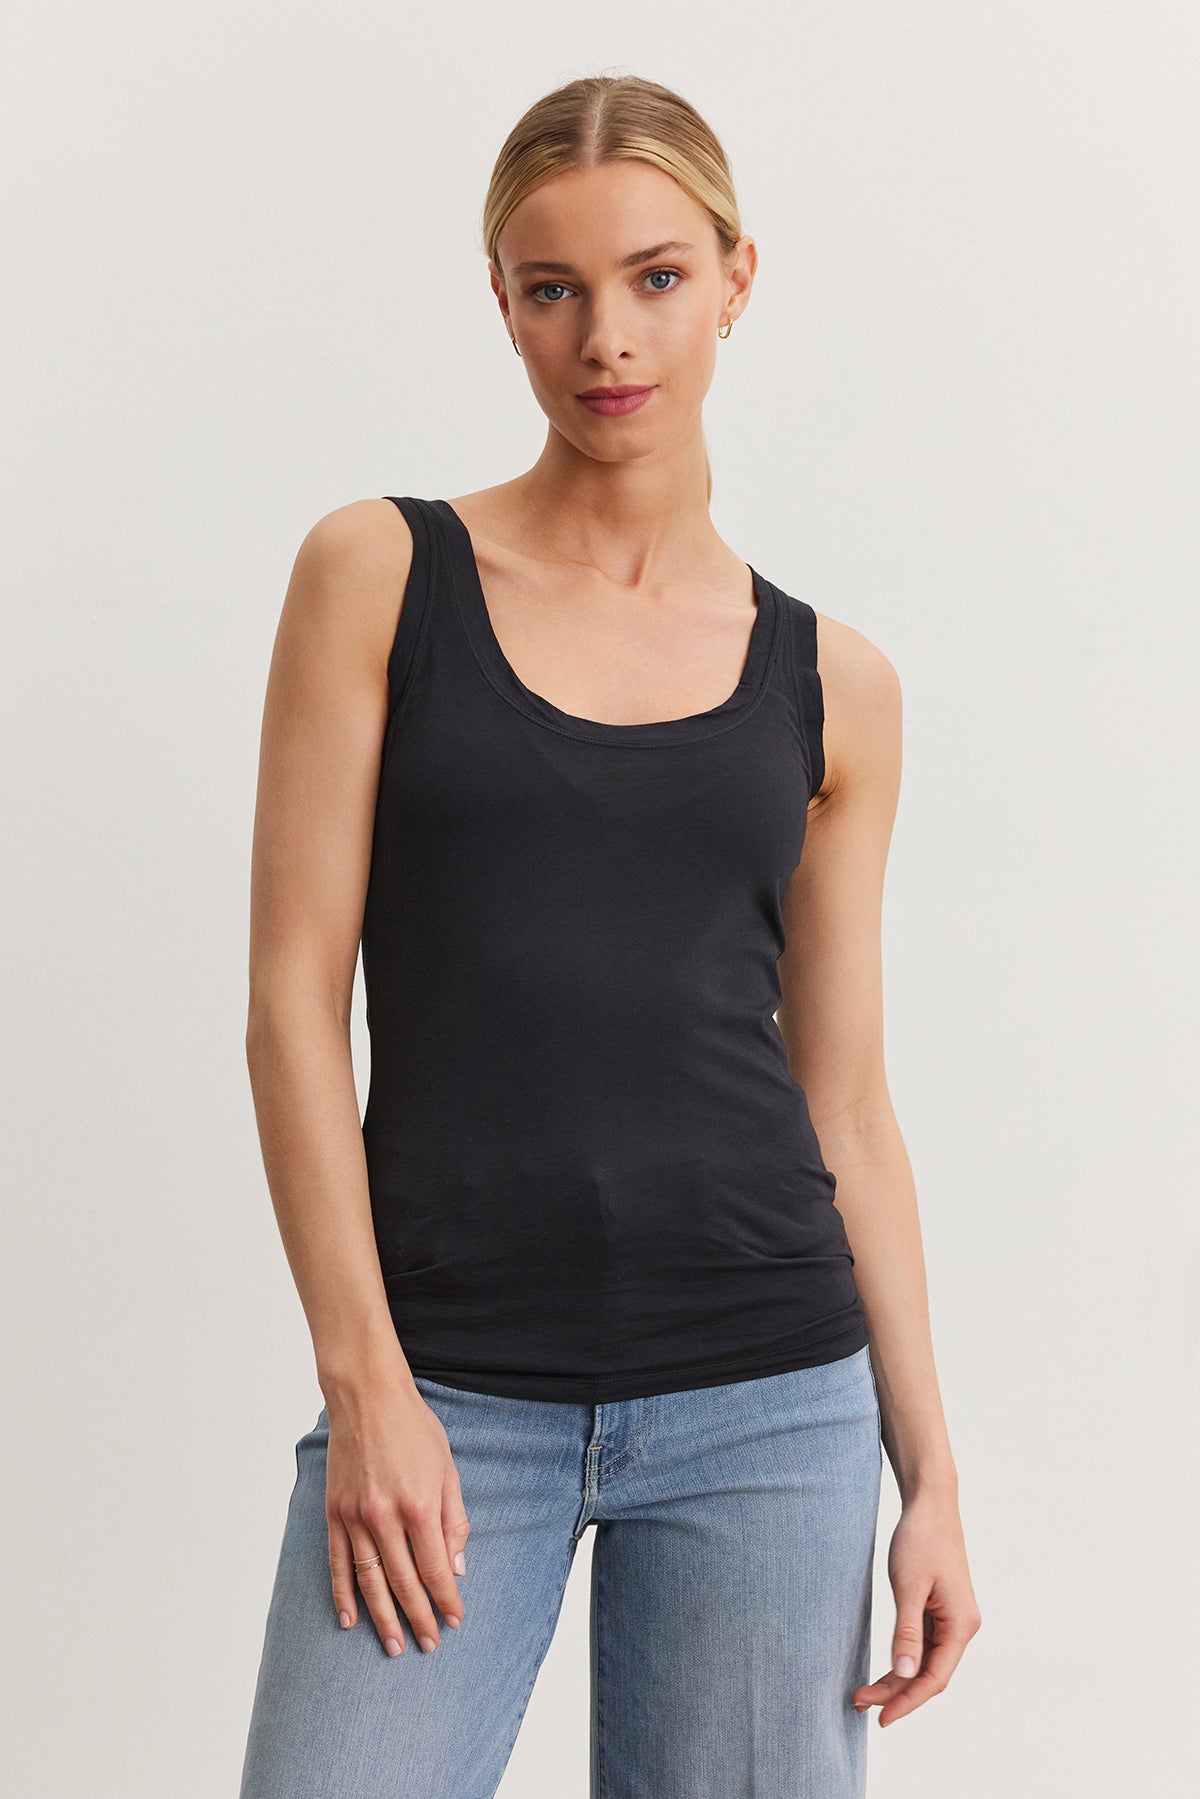   A person stands against a plain white background wearing a fitted MOSSY TANK TOP by Velvet by Graham & Spencer and blue jeans, showcasing the versatility of their wardrobe. 